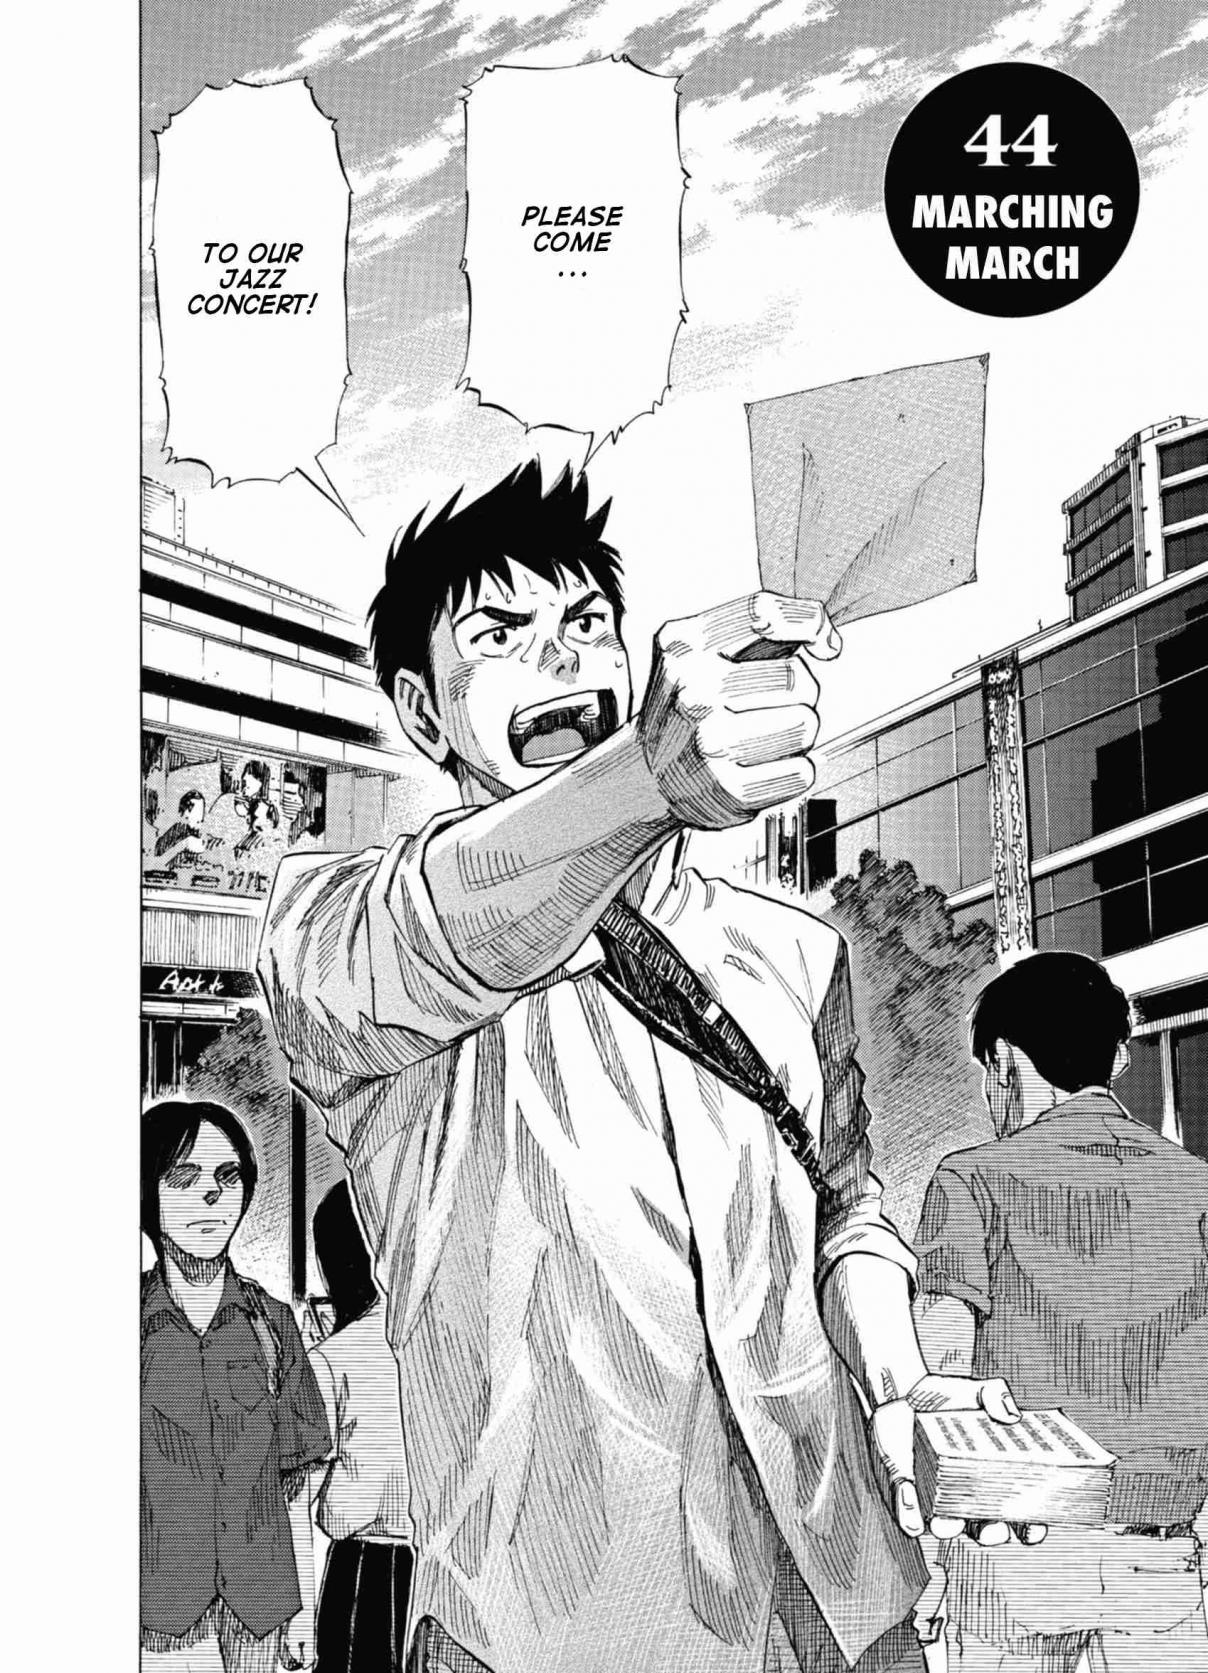 Blue Giant Vol. 6 Ch. 44 Marching March